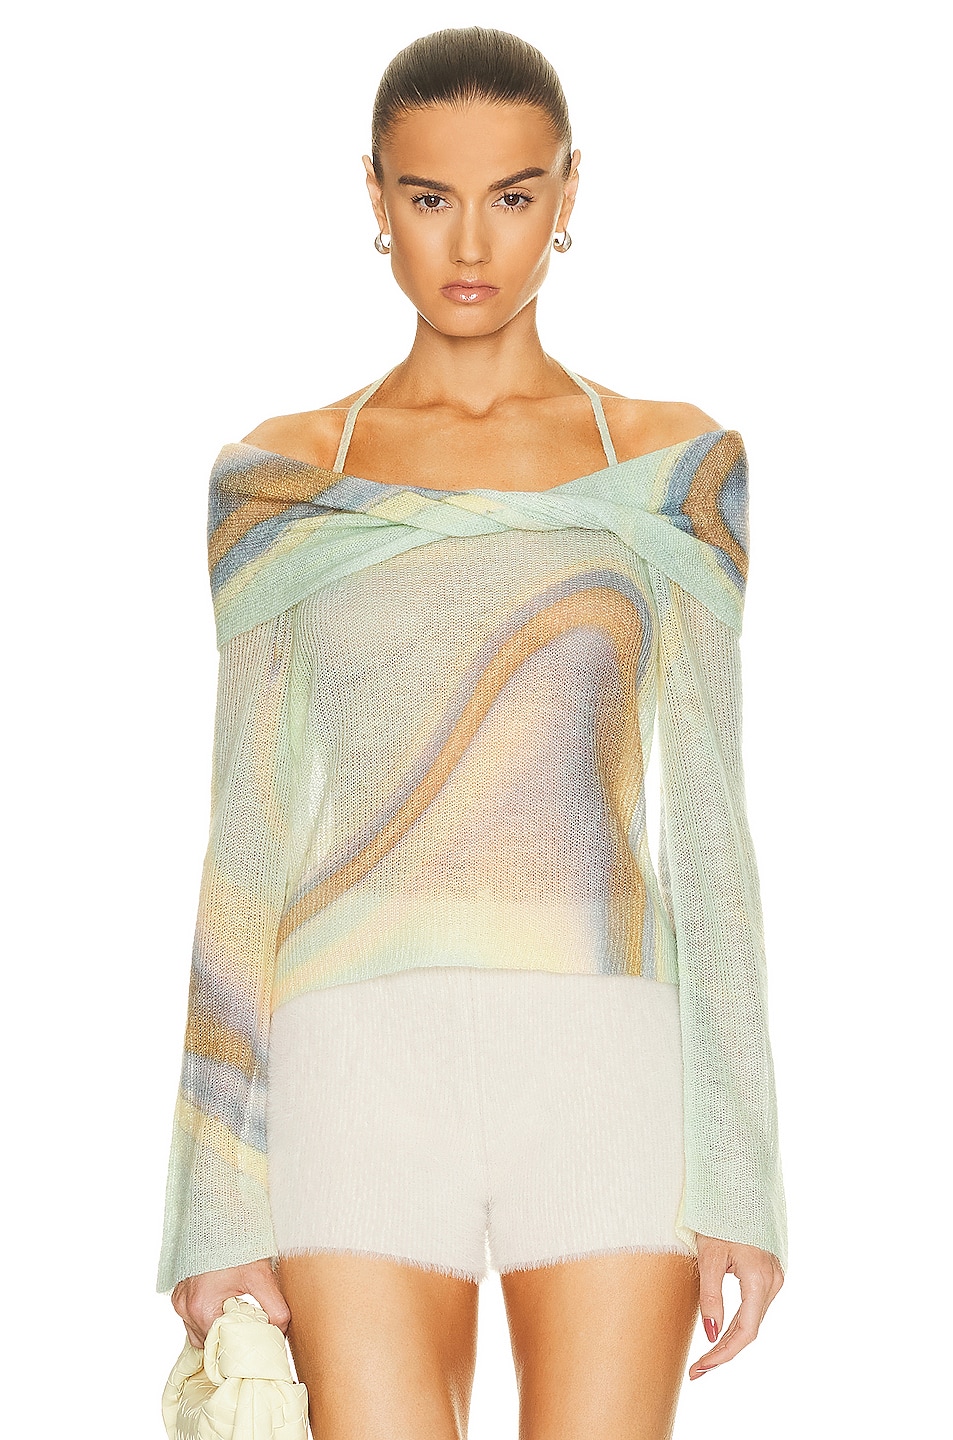 SIMKHAI Cambria Mohair Off Shoulder Top in Alabaster Marble Print | FWRD